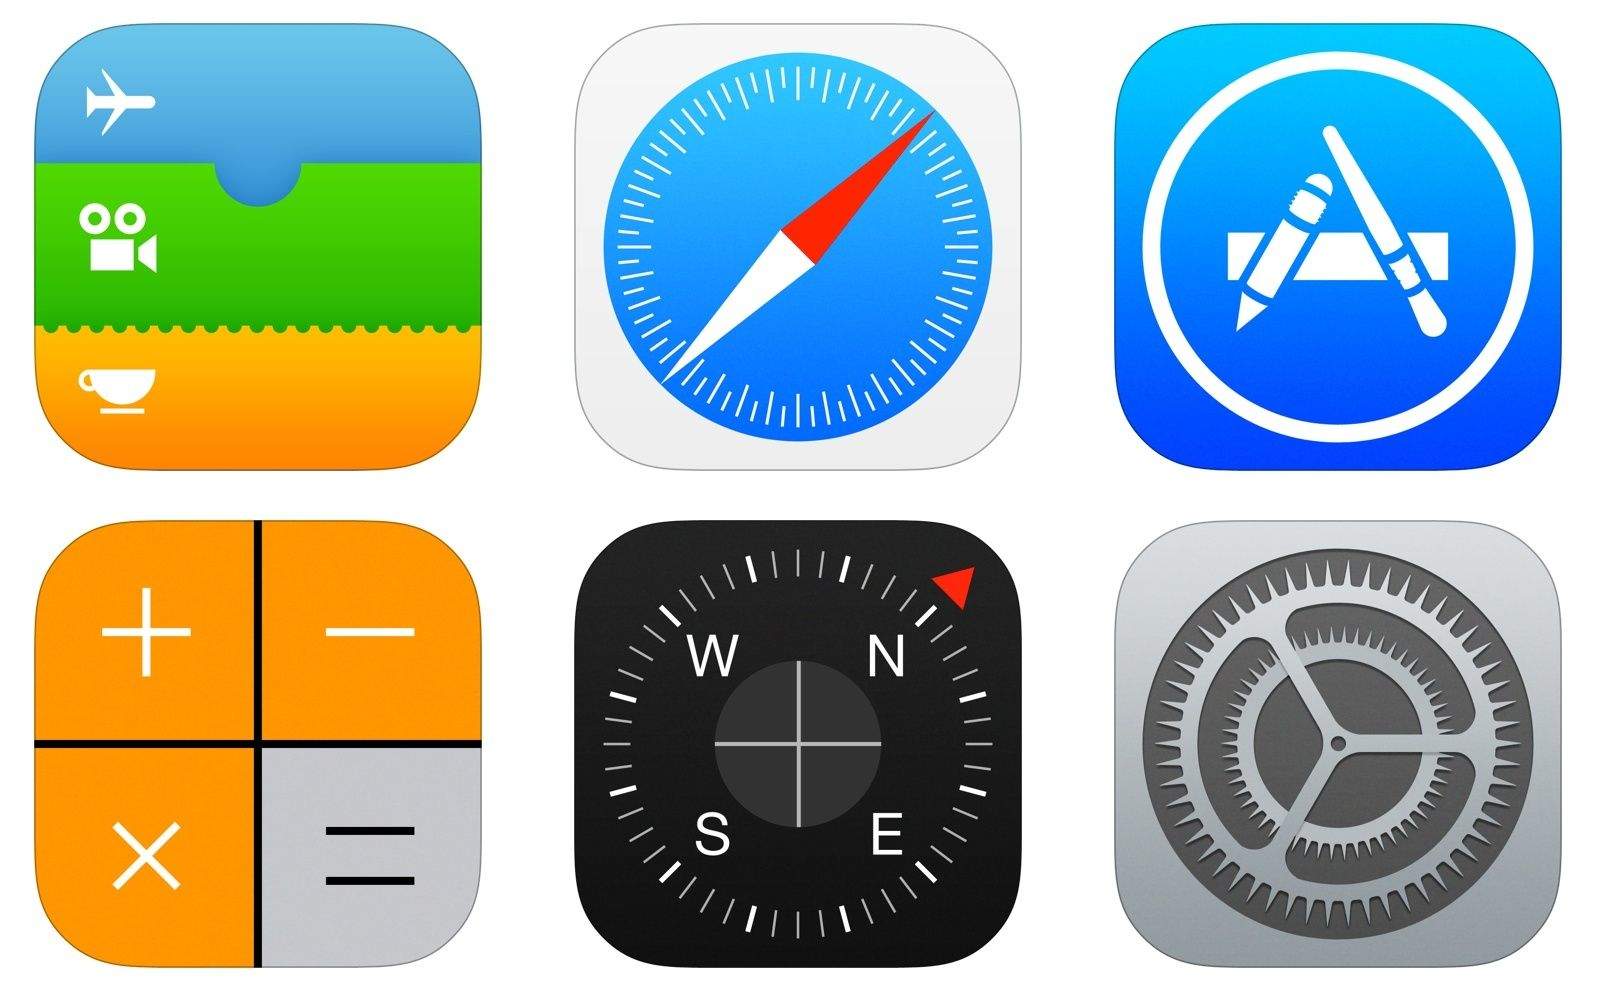 How to easily move multiple app icons and folders at once on your 